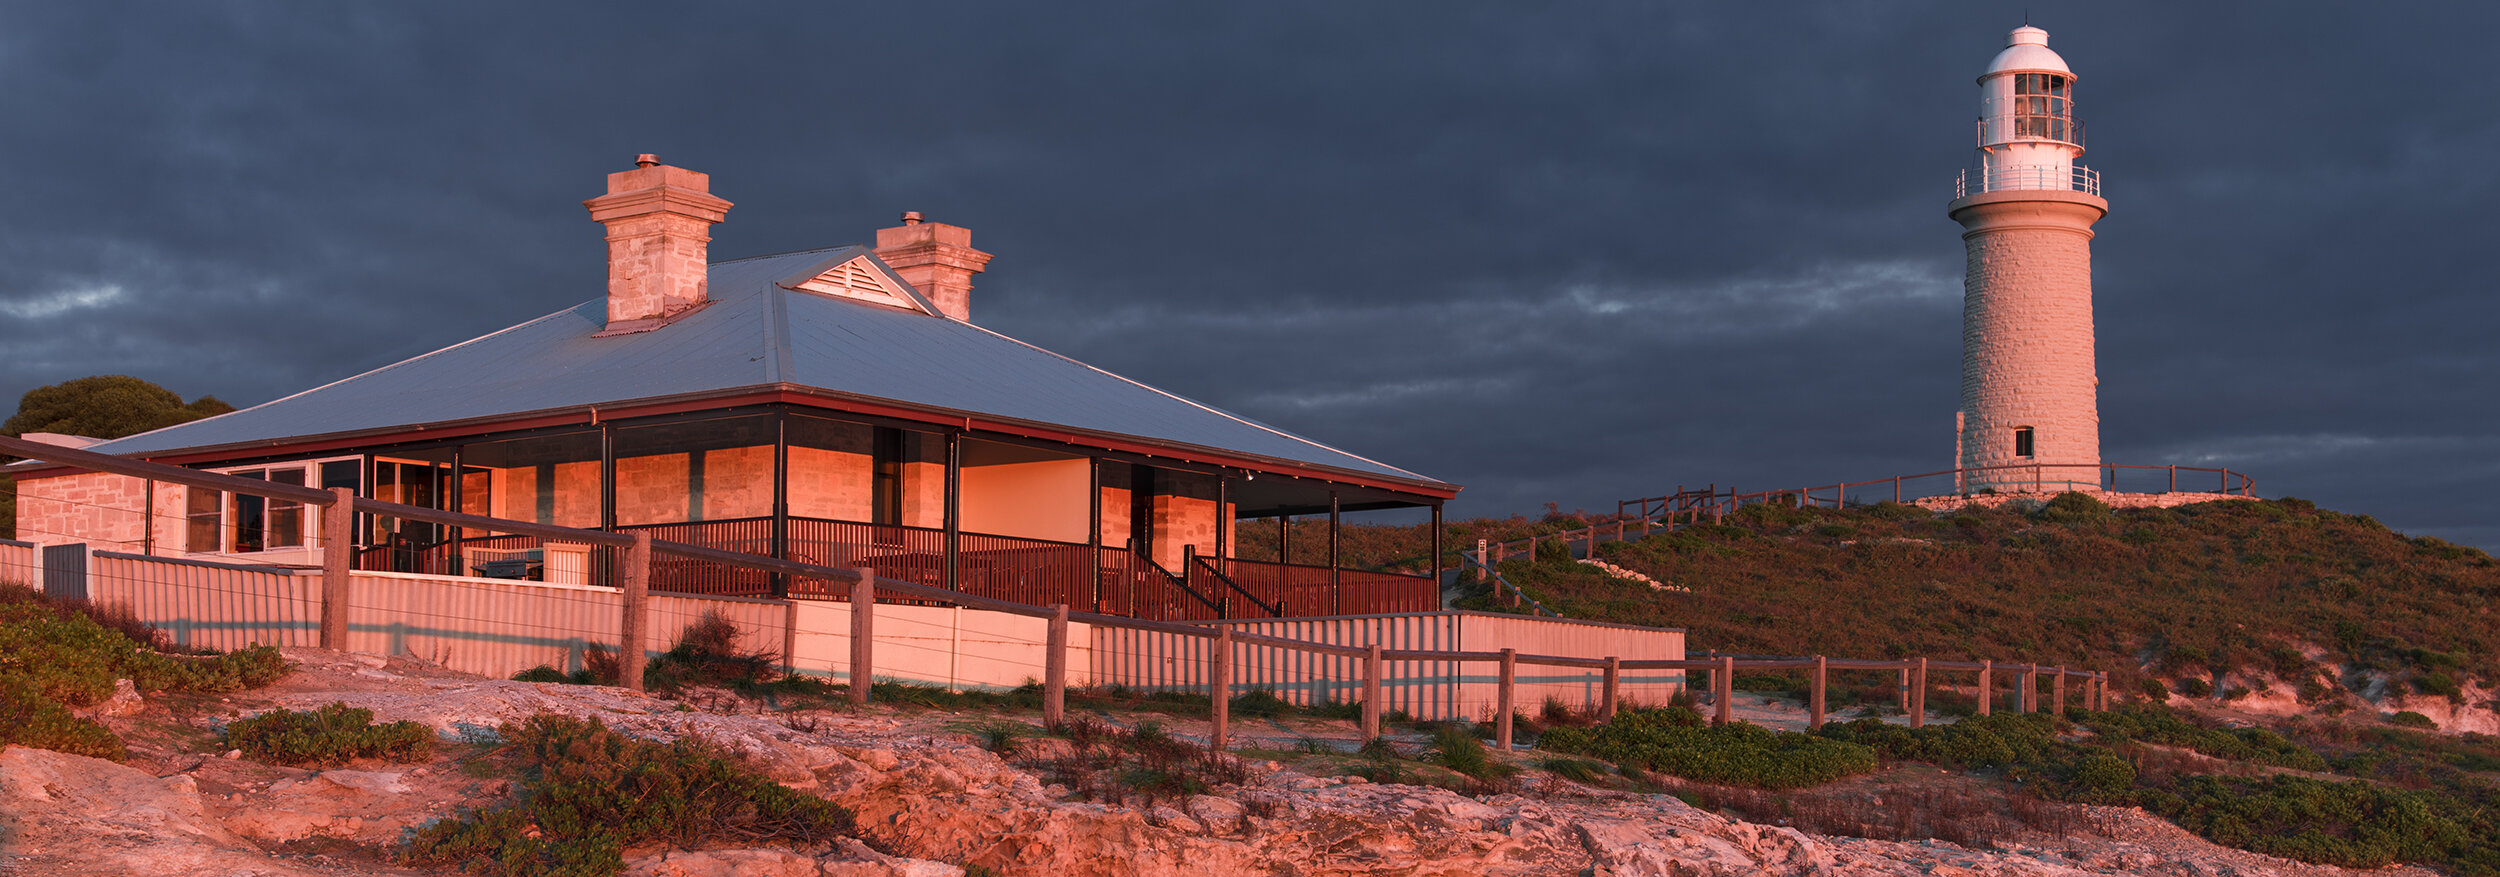 BATHURST LIGHTHOUSE - COTTAGE AT FIRST LIGHT from $255 AUD